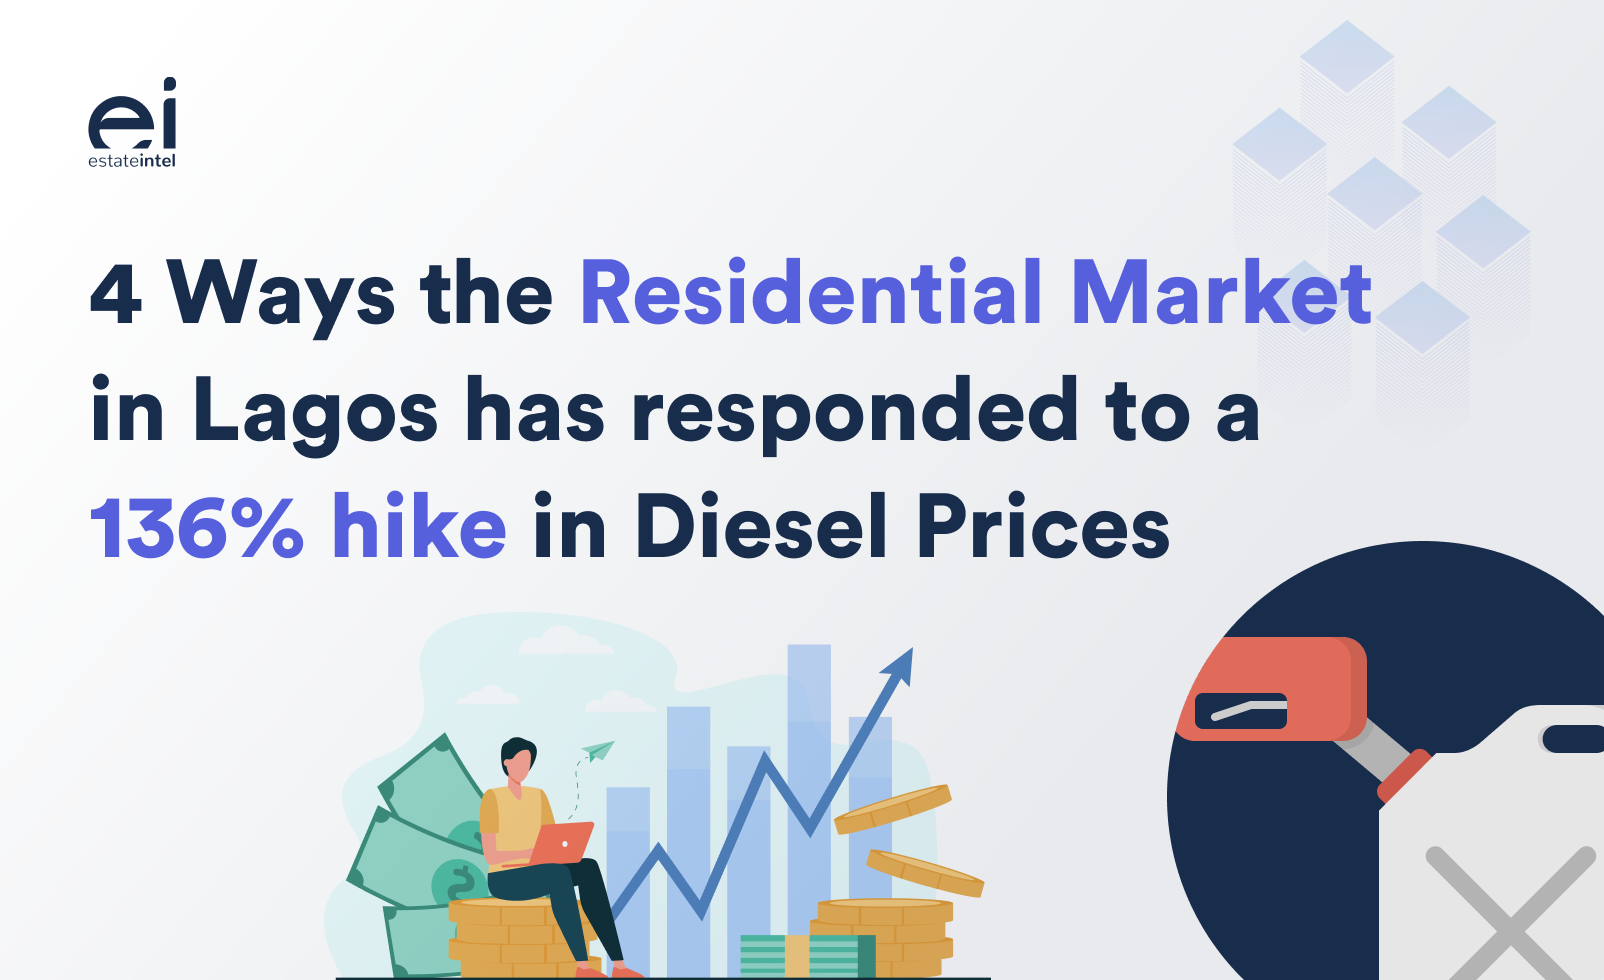 Here&#8217;s how the Residential Market has responded to a 136% hike in Diesel Prices